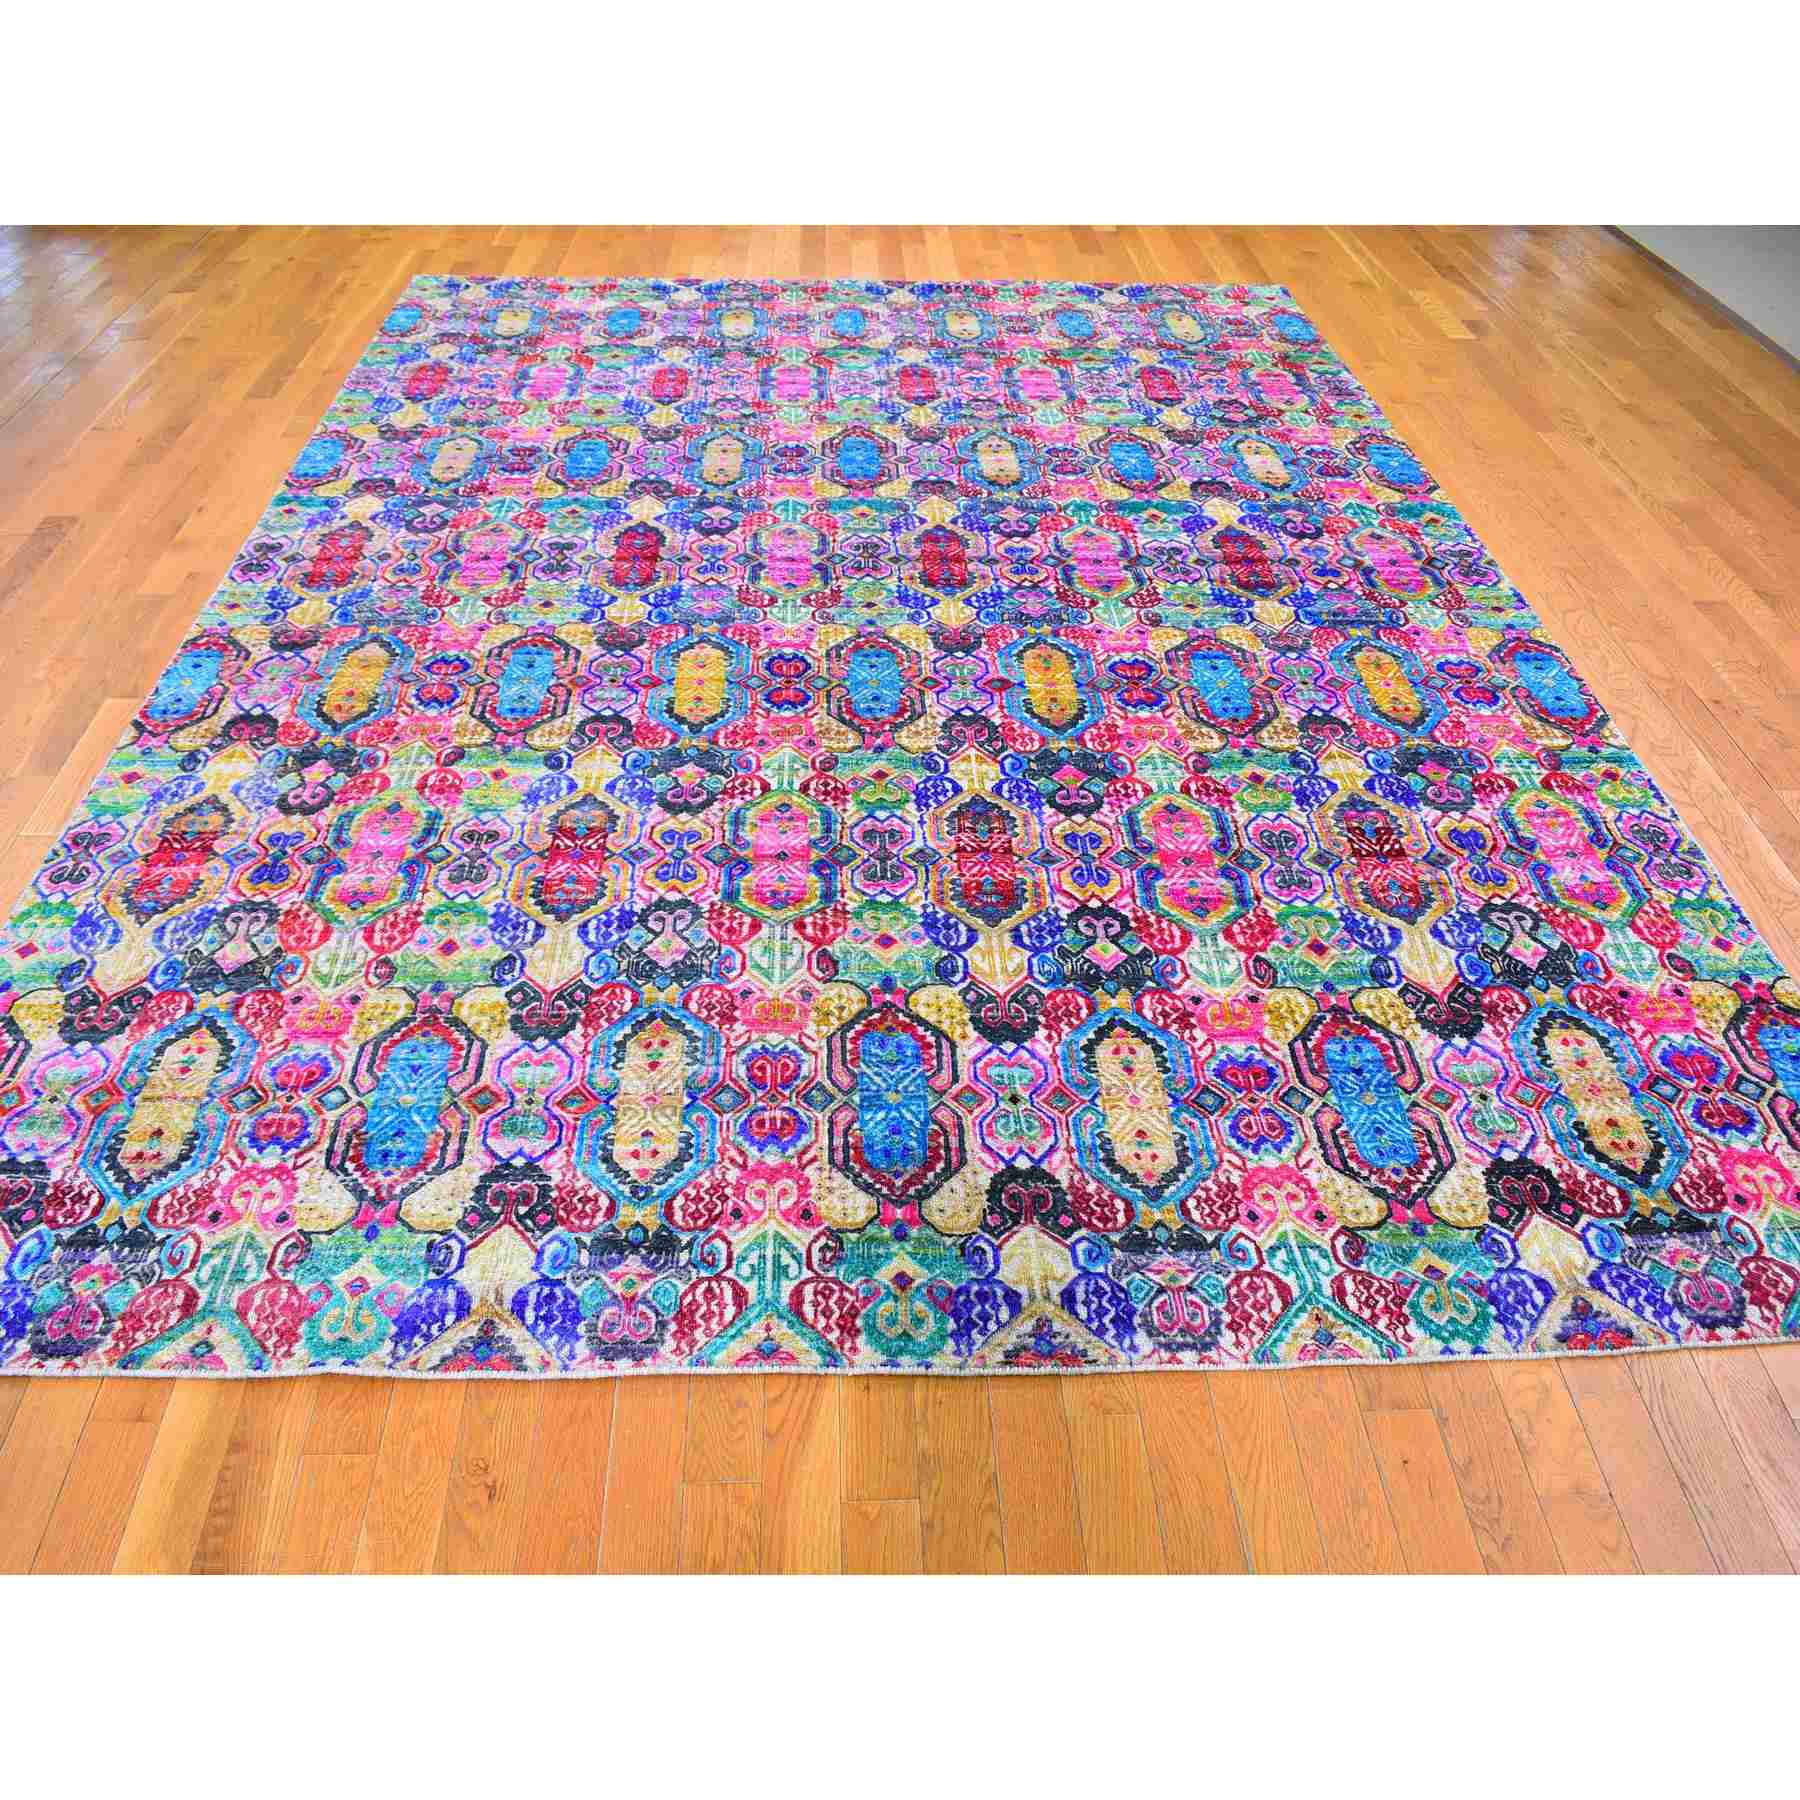 Modern-and-Contemporary-Hand-Knotted-Rug-297300